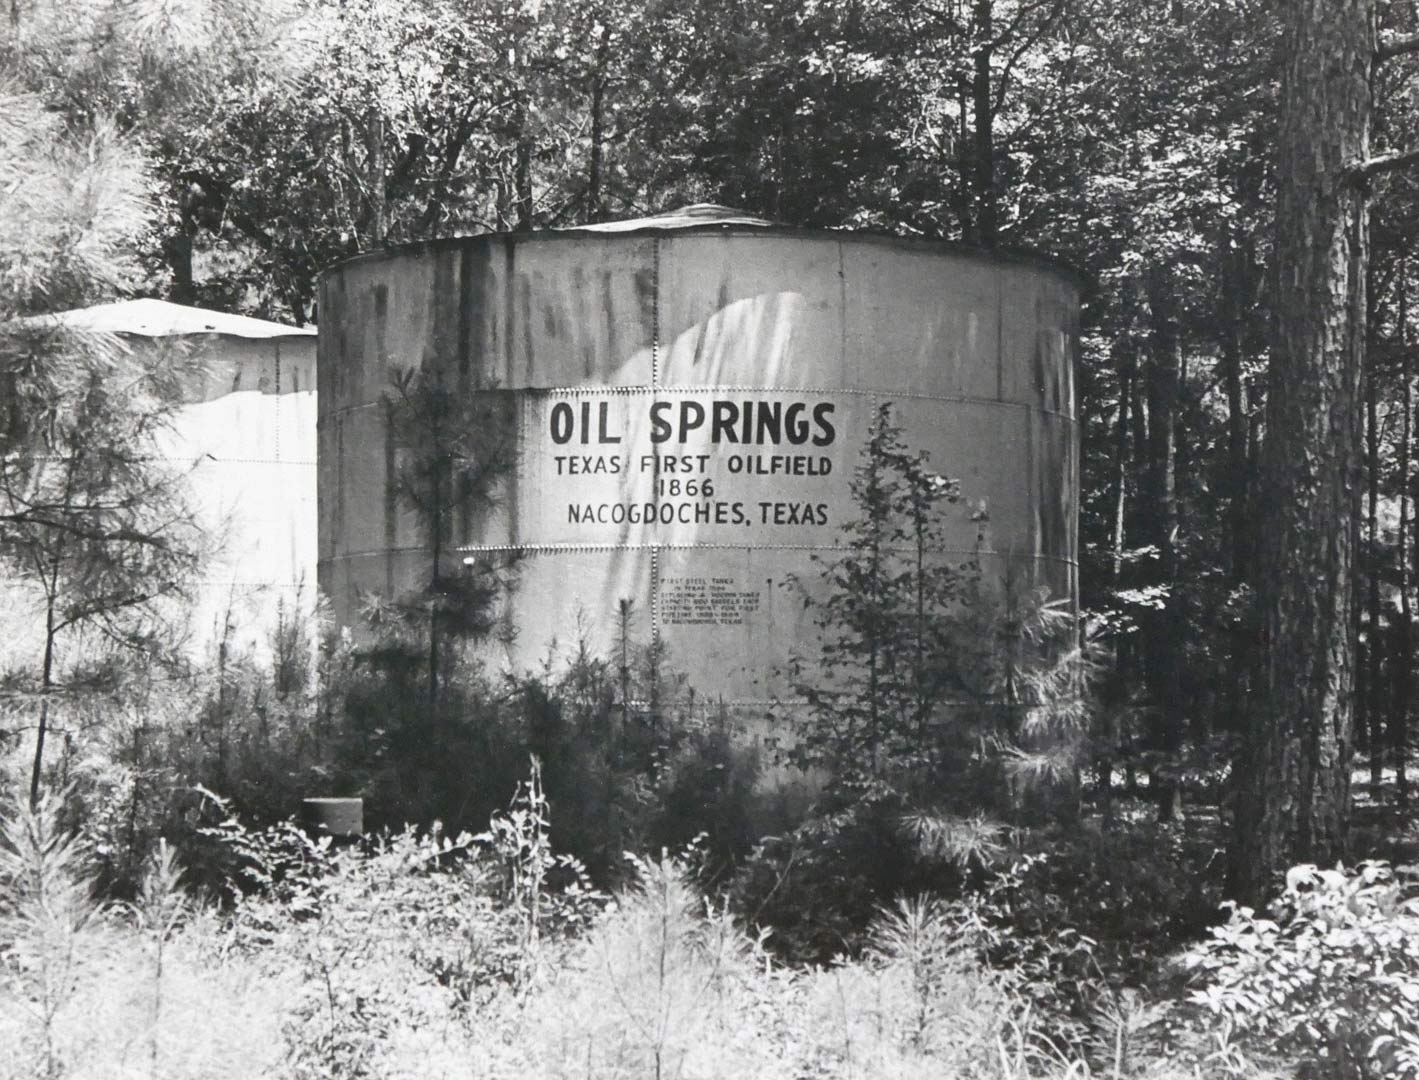 Site of Texas' first producing oil well. In the Big Thicket area near Nacogdoches.